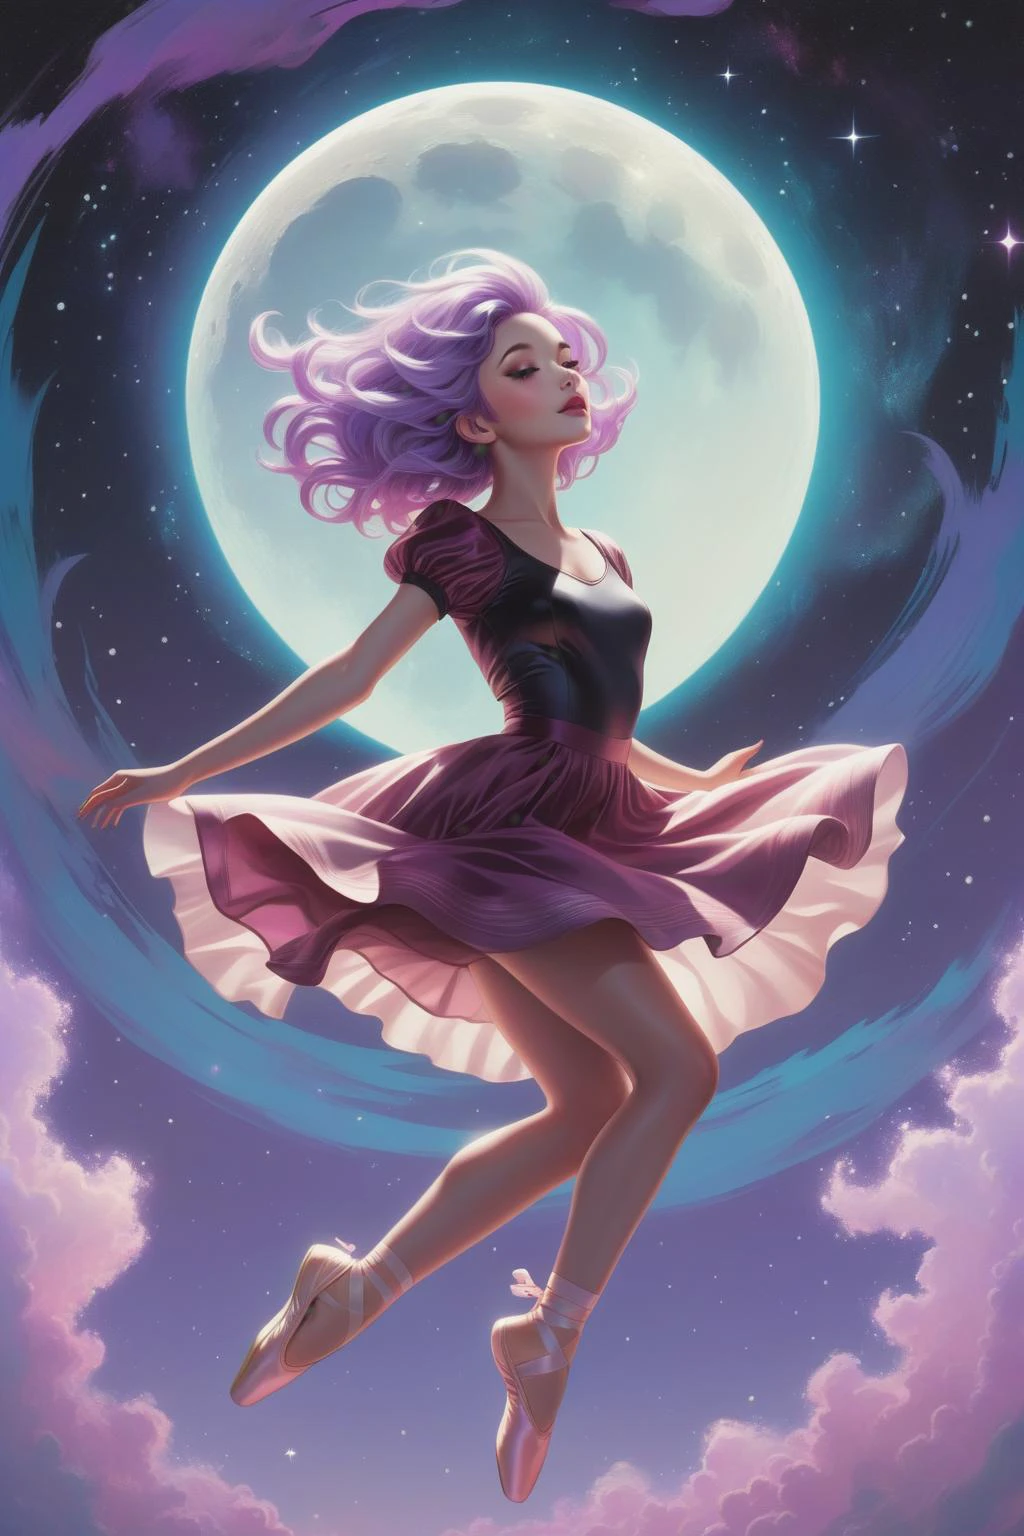 in the style of artgerm, (1girl),(in the sky is blackhole and empty moon and starfield ,               day, ),Jumping in a ballet leap, Beachy waves, extremely detailed clothes, Lilac hair, looking at viewer, retro ink, neon Maroon glow